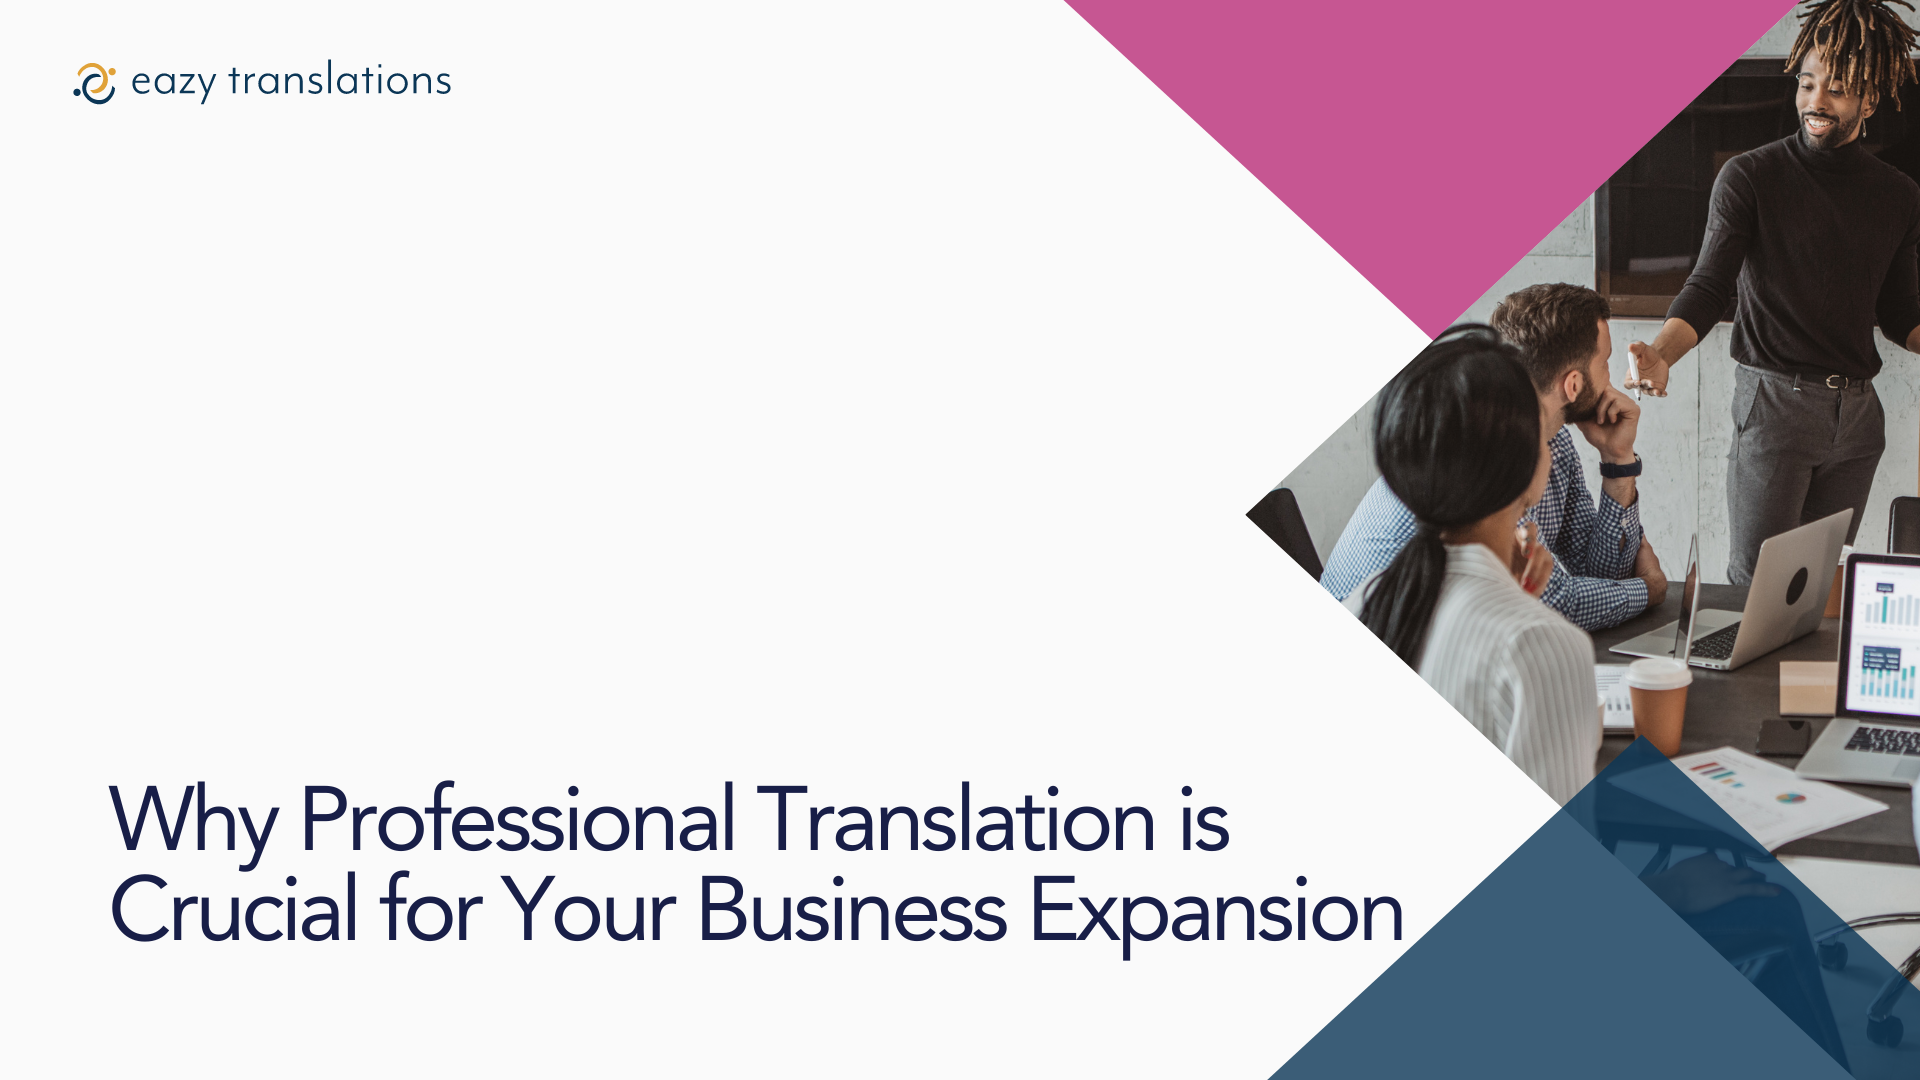 Why Professional Translation is Crucial for Your Business Expansion